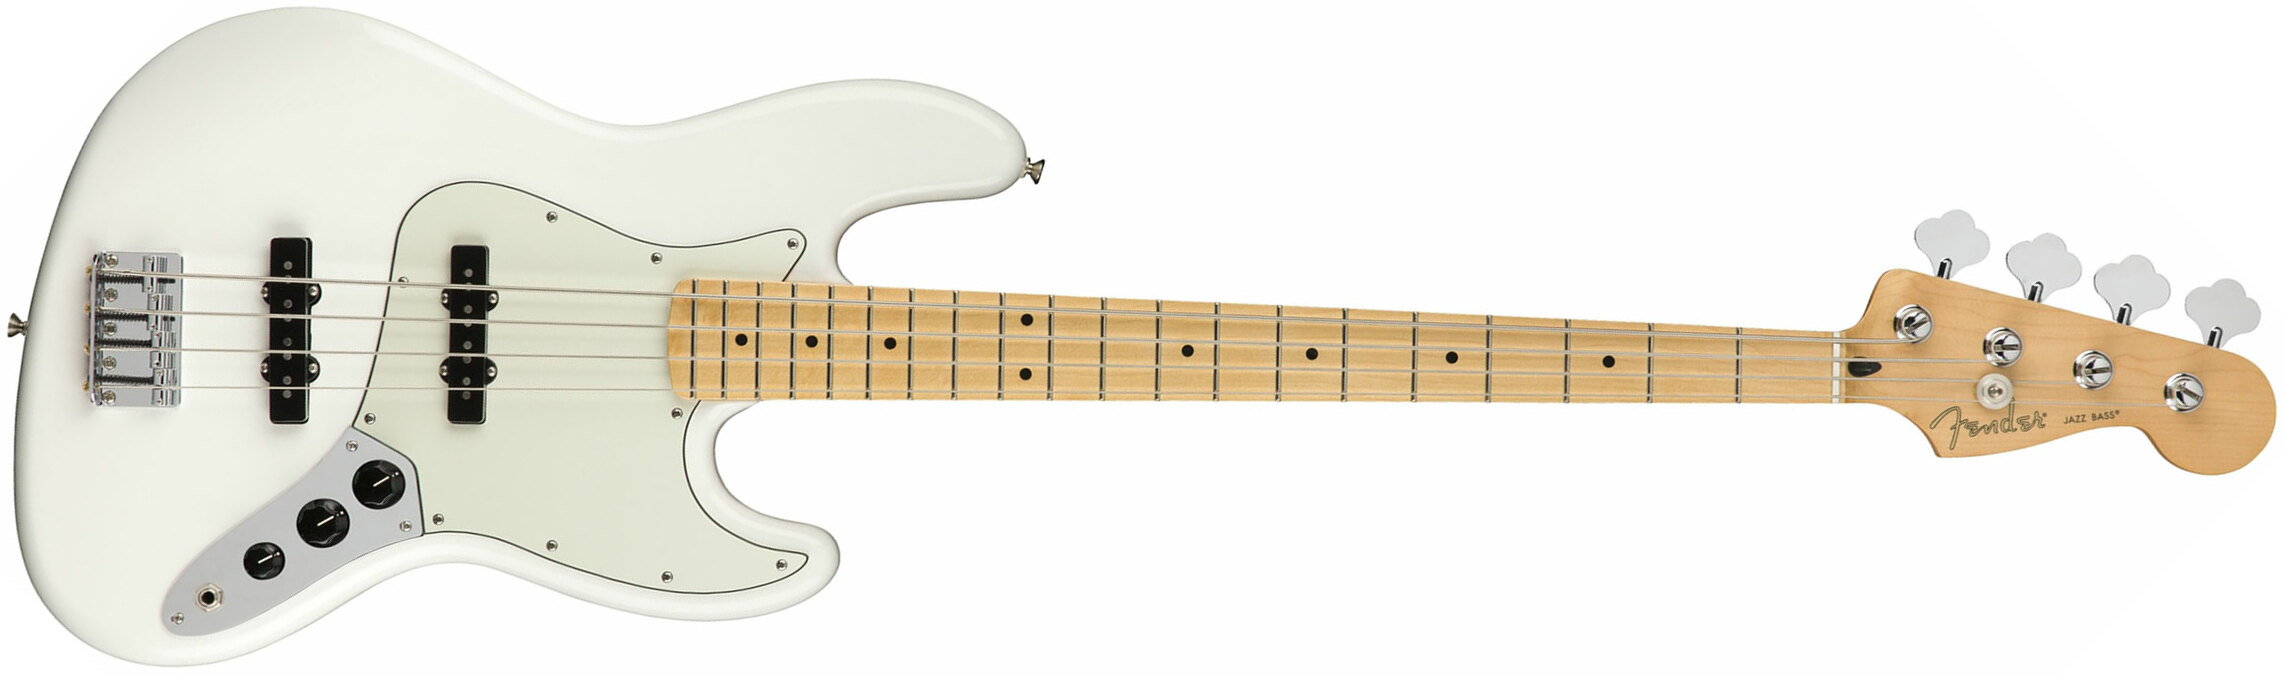 Fender Jazz Bass Player Mex Mn - Polar White - Basse Électrique Solid Body - Main picture